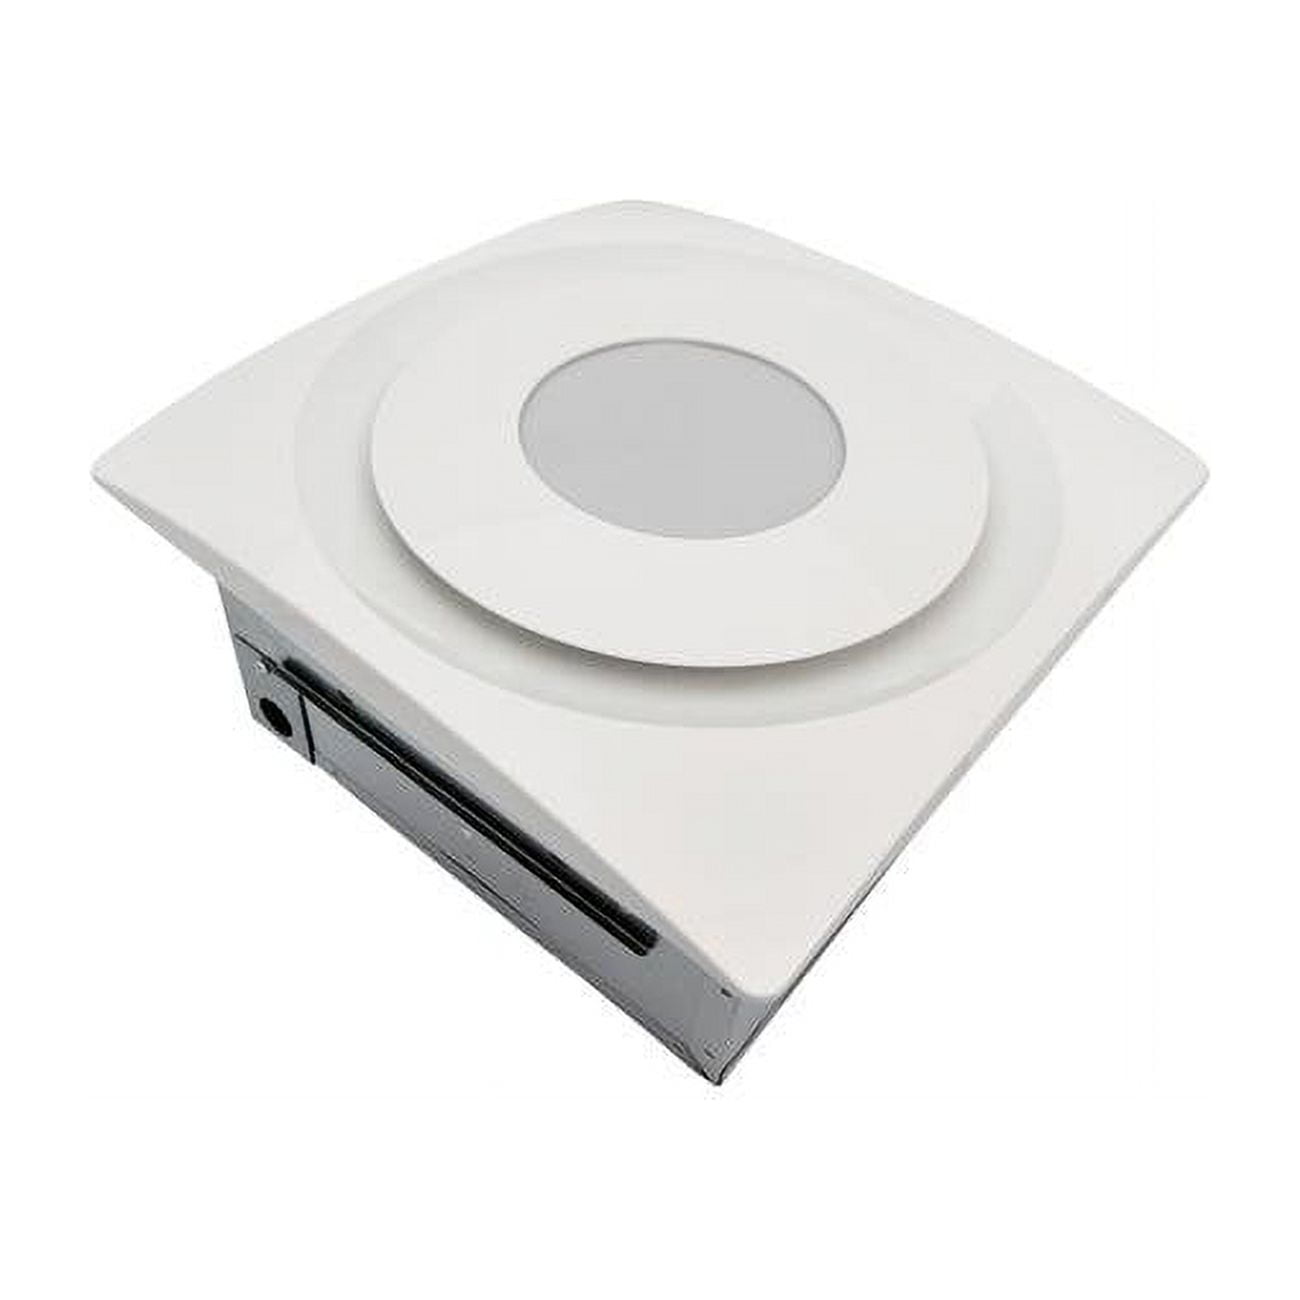 Picture of Aero Pure AP124H-SL W 120 CFM Quiet Bathroom Fan with LED Light & Humidity Sensor - White